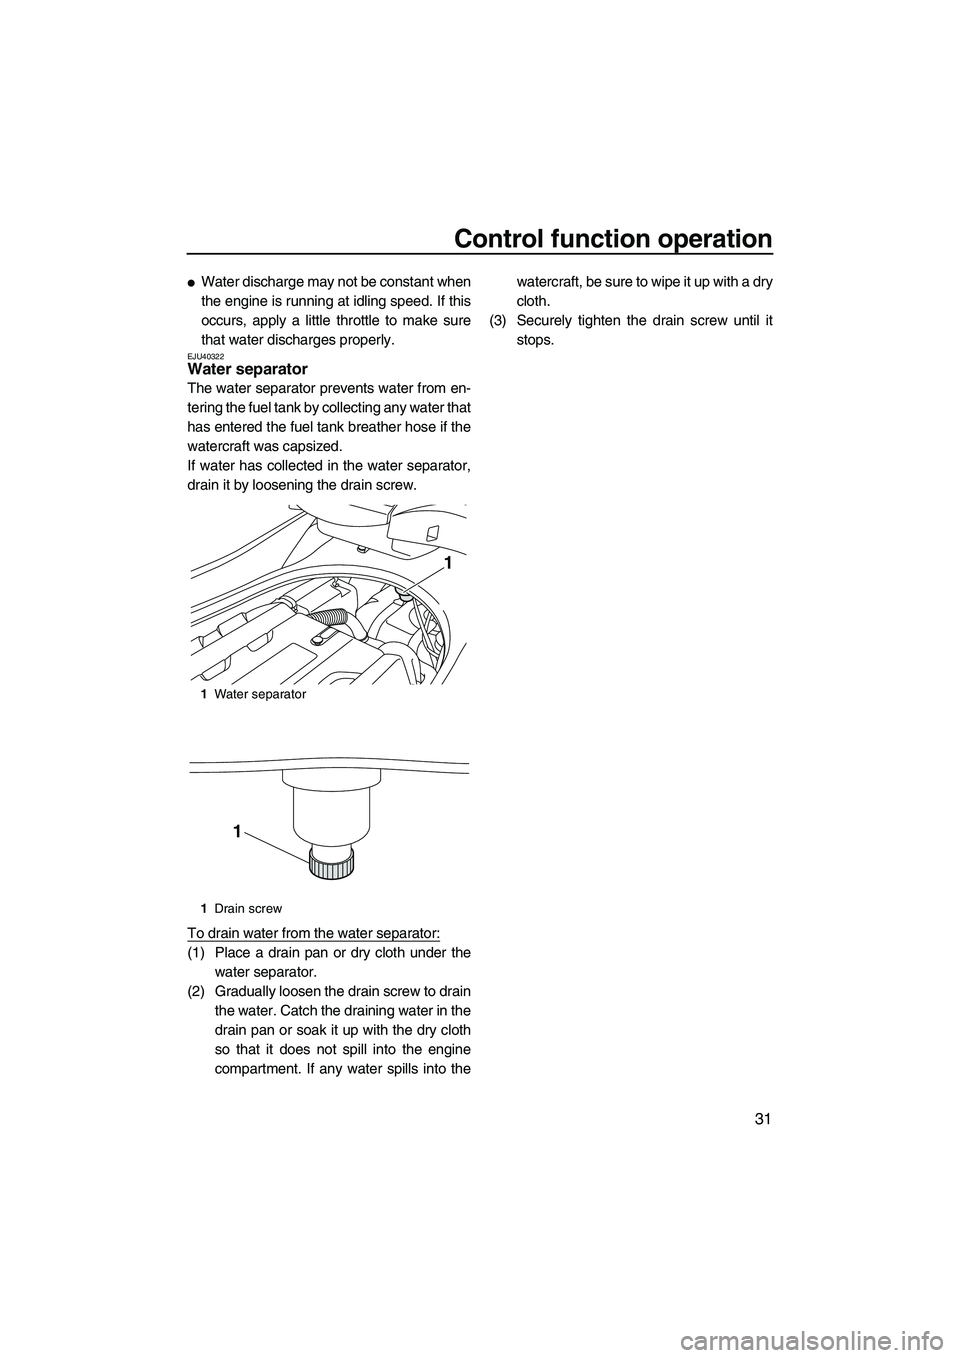 YAMAHA FZS 2013  Owners Manual Control function operation
31
●Water discharge may not be constant when
the engine is running at idling speed. If this
occurs, apply a little throttle to make sure
that water discharges properly.
EJ